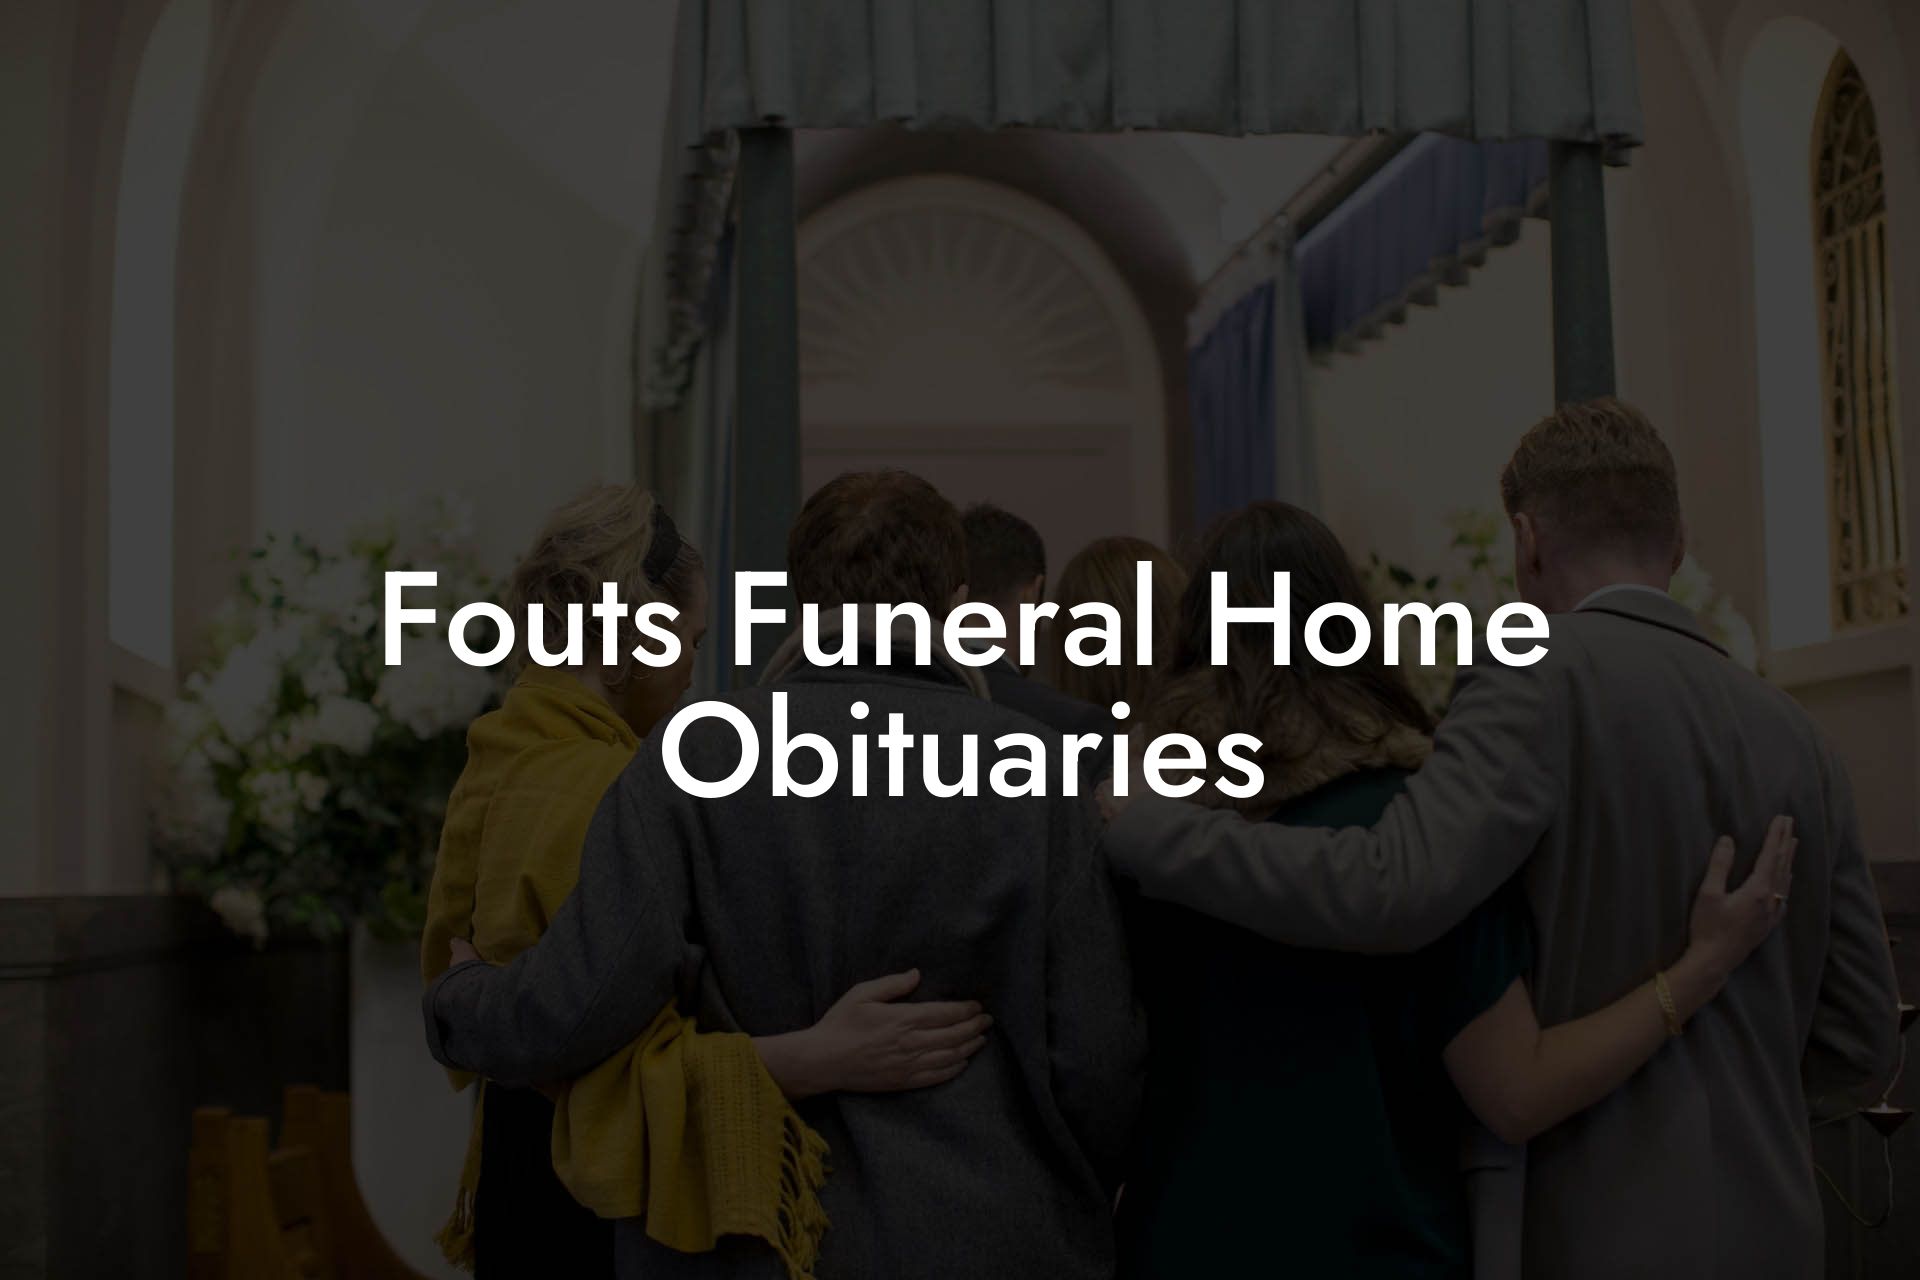 Fouts Funeral Home Obituaries